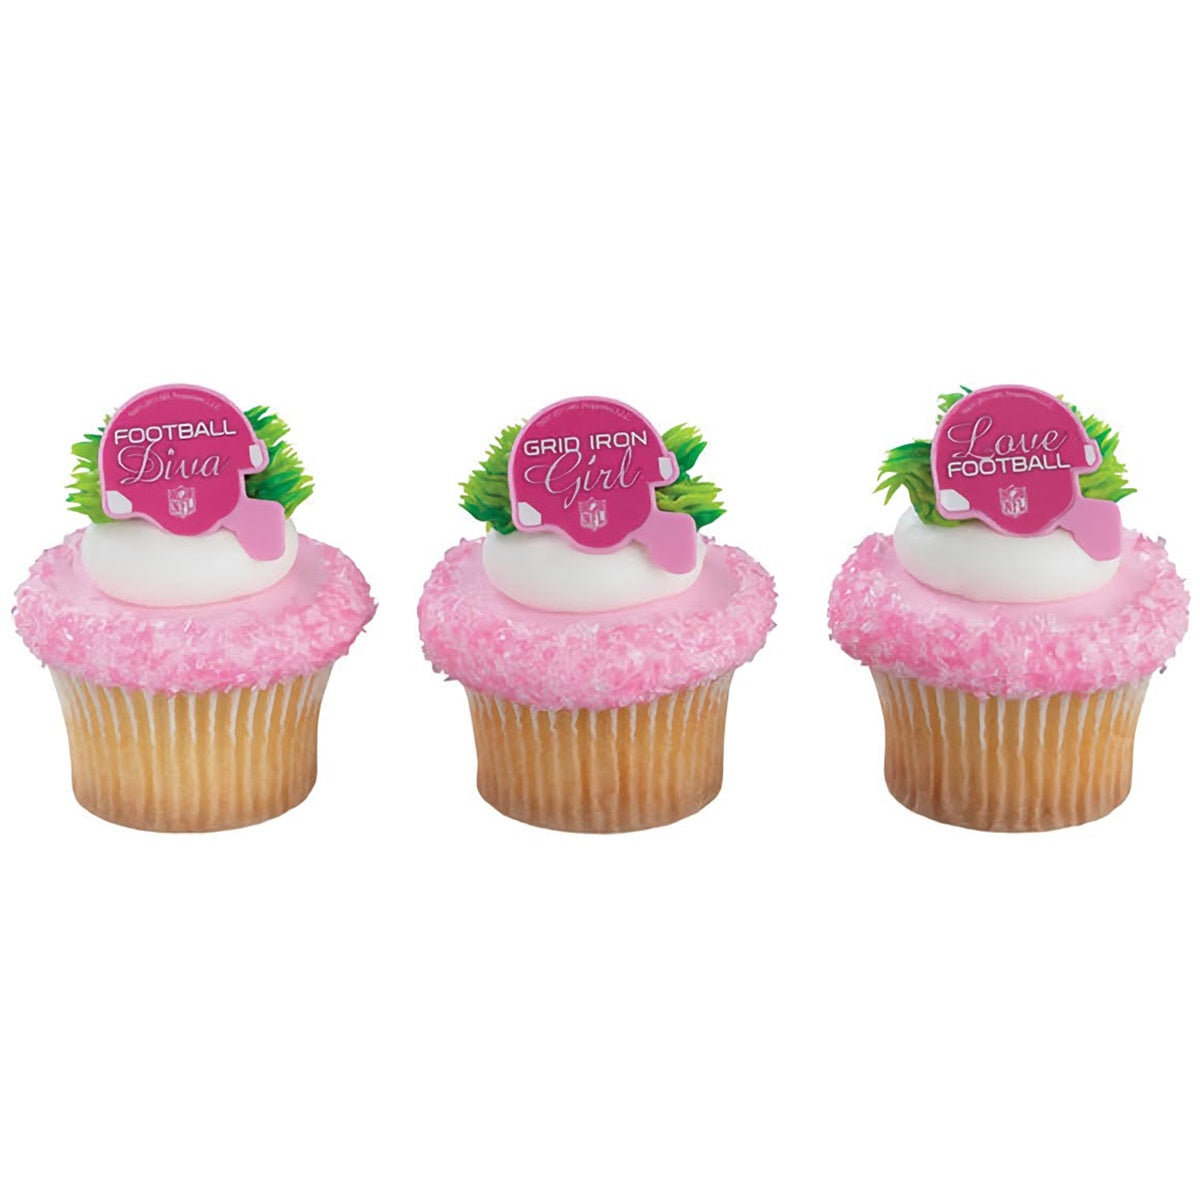 Set of six pink NFL helmet cupcake rings, a fun way to add a sporty flair to cupcakes for game day celebrations, football party favors, or a sports-themed birthday bash.